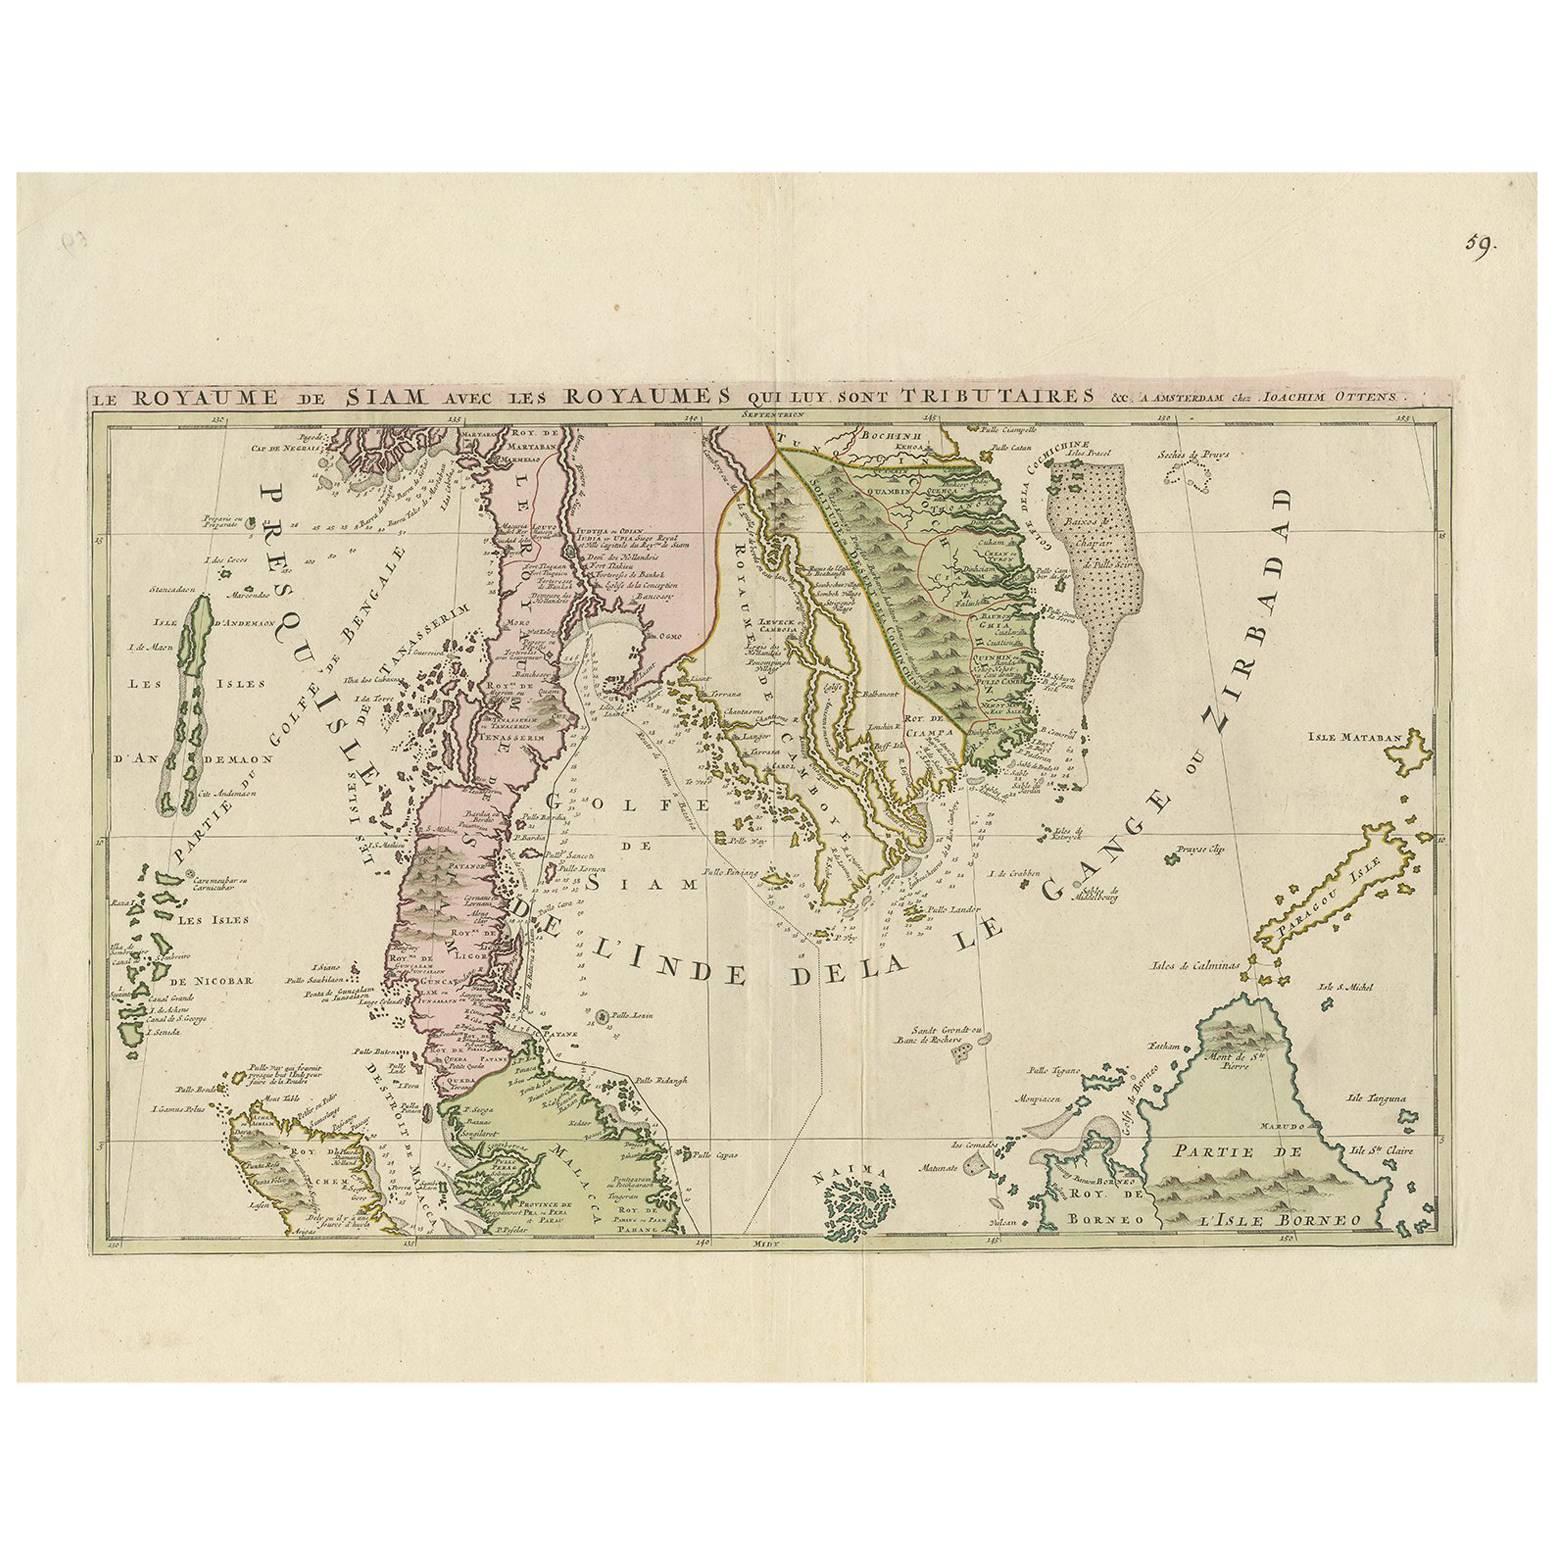 Antique Map of Southeast Asia by J. Ottens, 1710